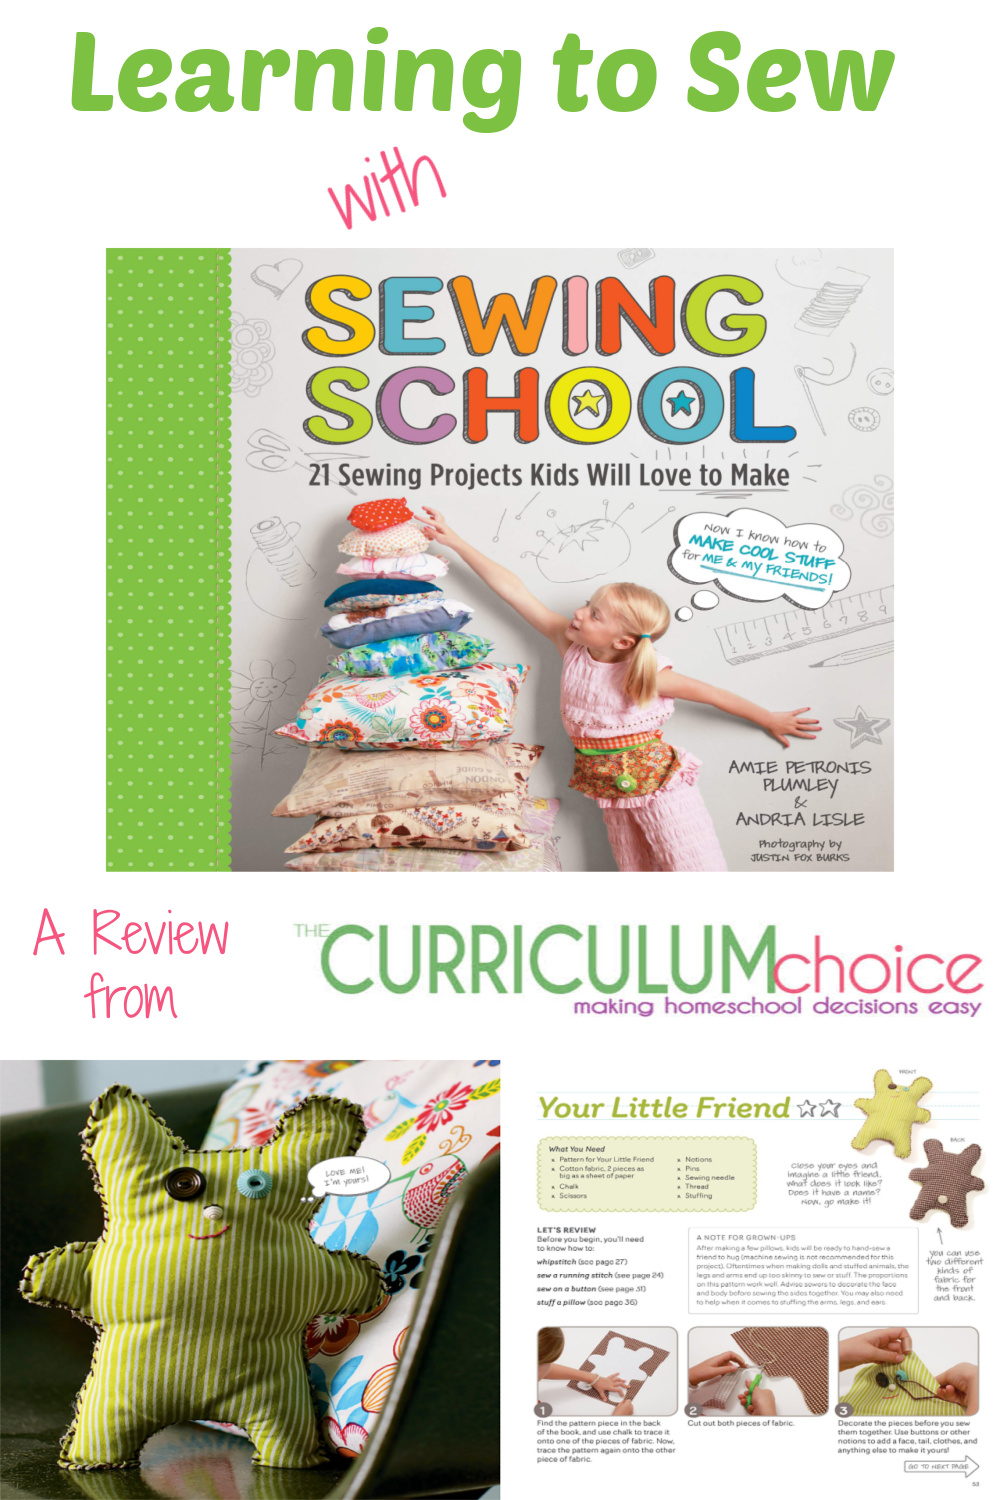 https://www.thecurriculumchoice.com/wp-content/uploads/2014/04/Learning-to-Sew-with-Sewing-School-pin.jpg